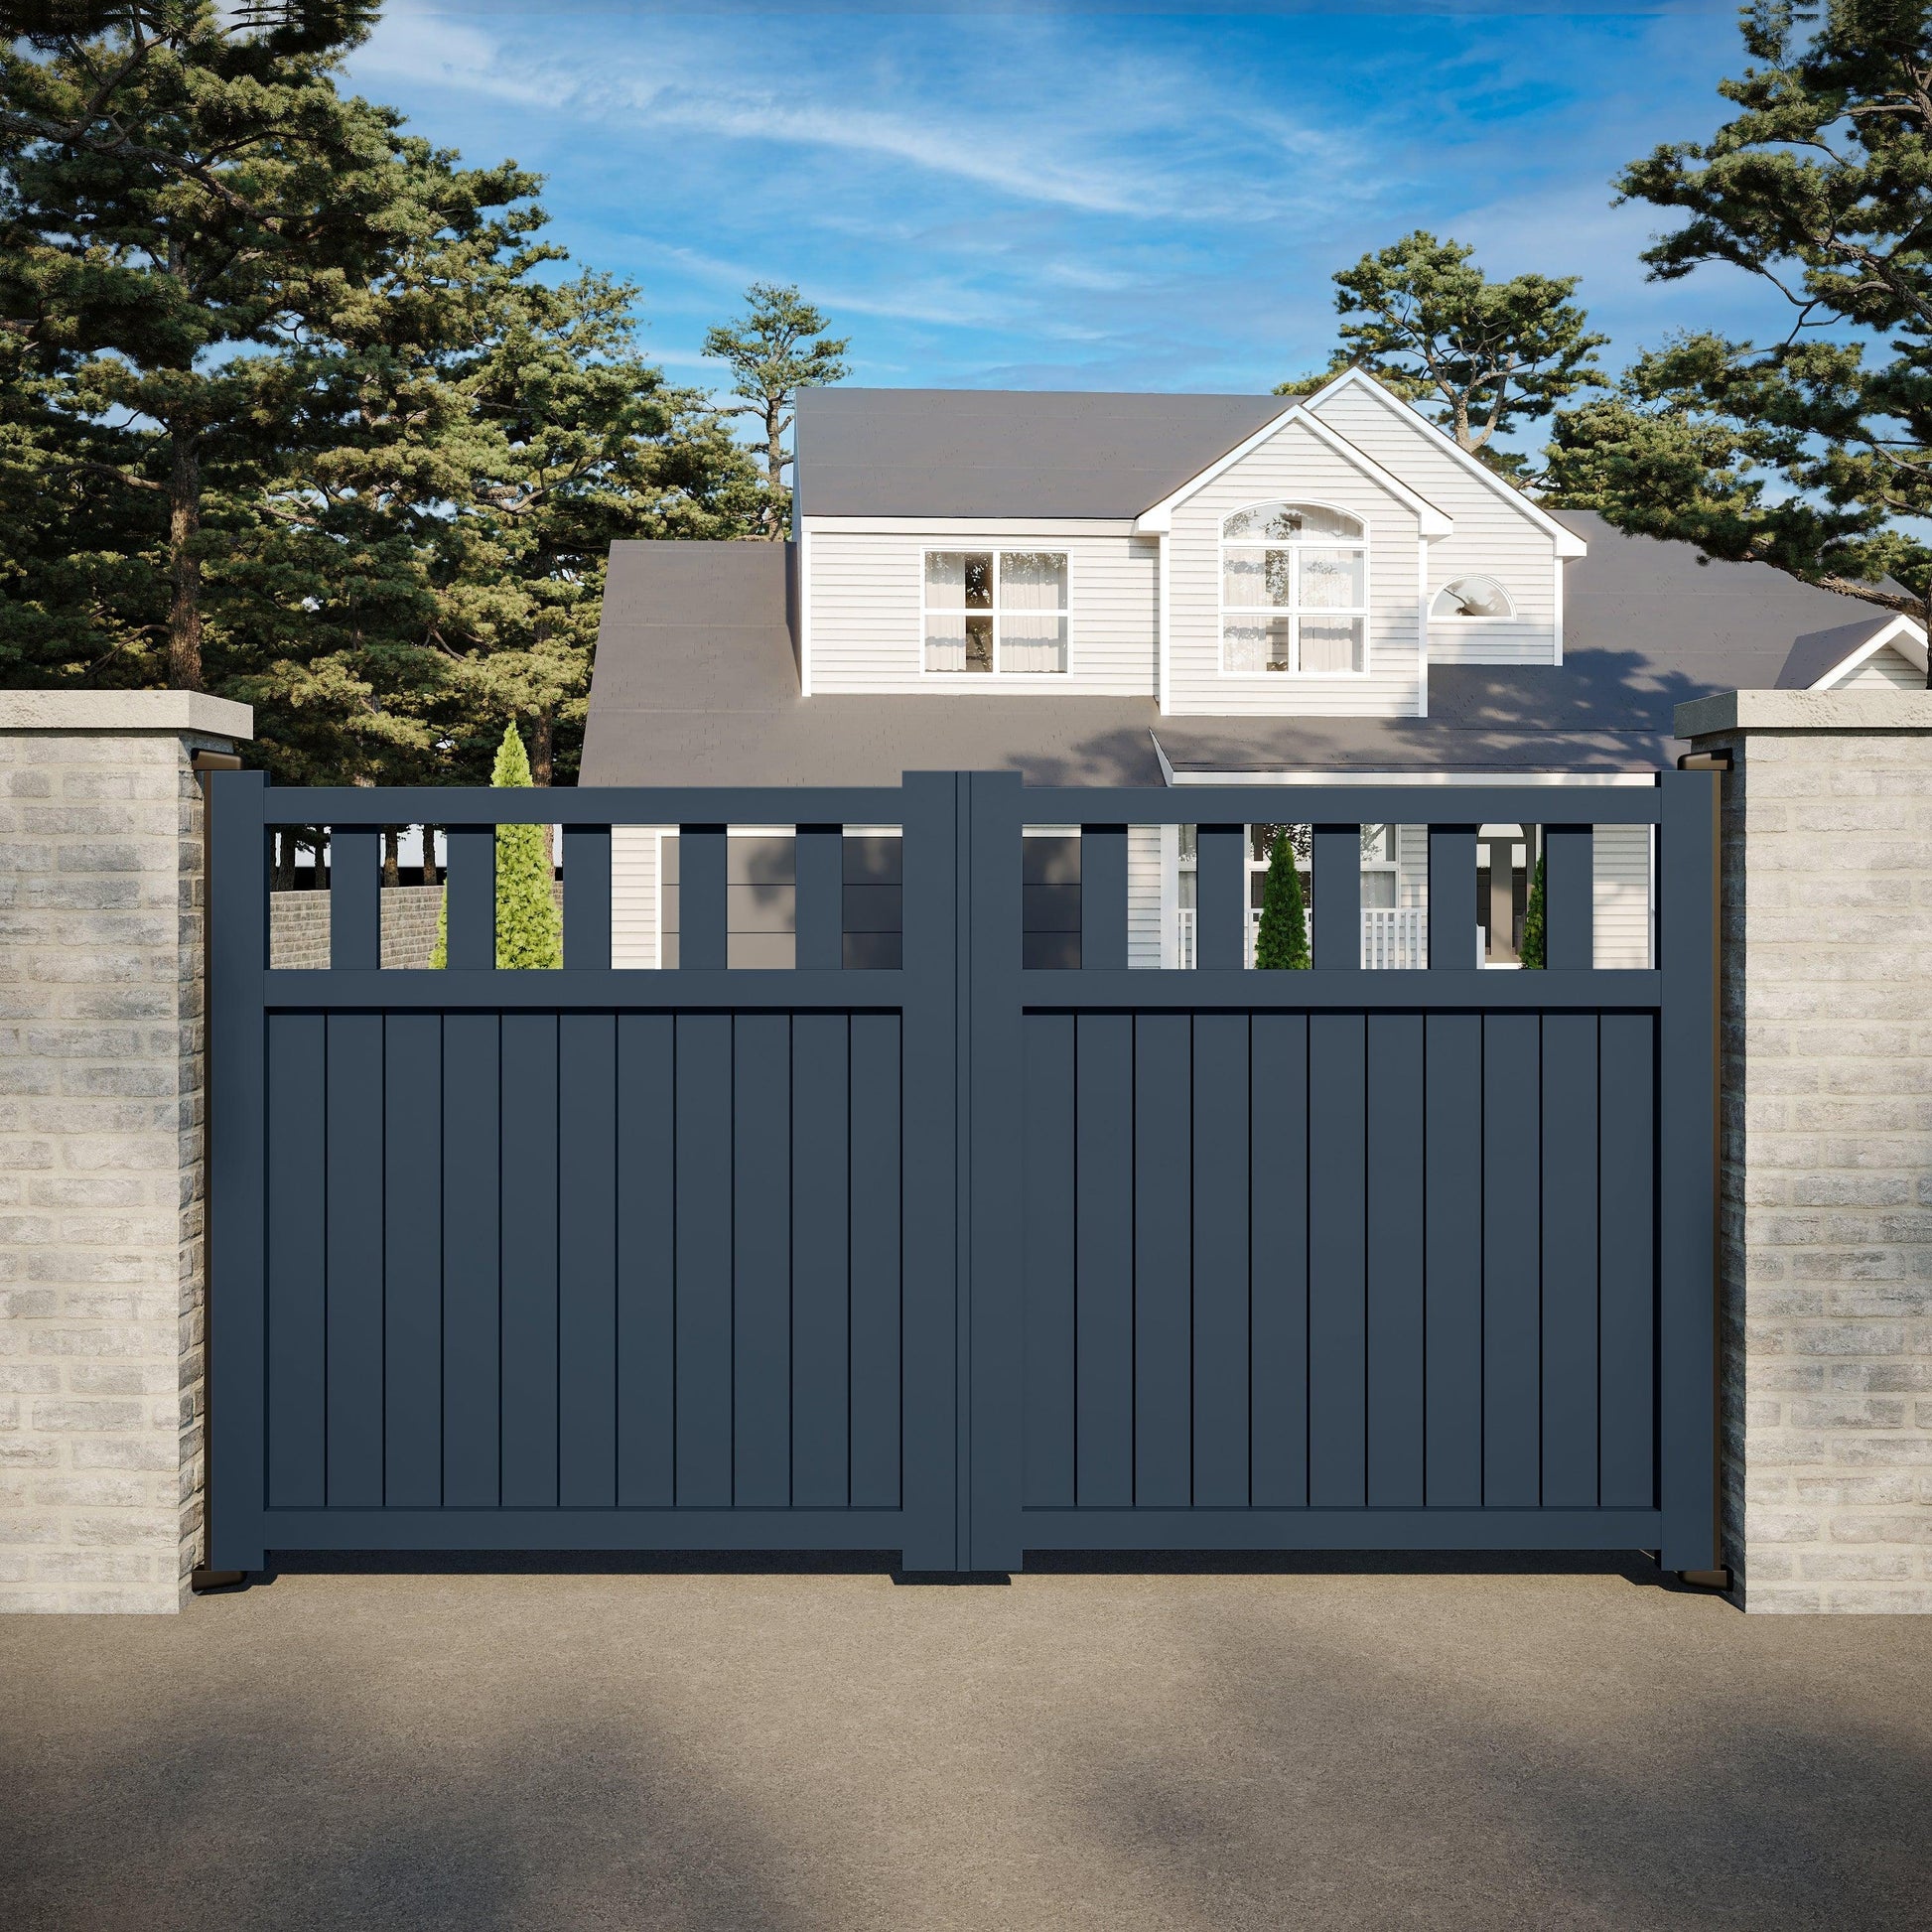 OpenSky | Aluminium Partial Privacy Open-Top Driveway Gate - Residential Gates